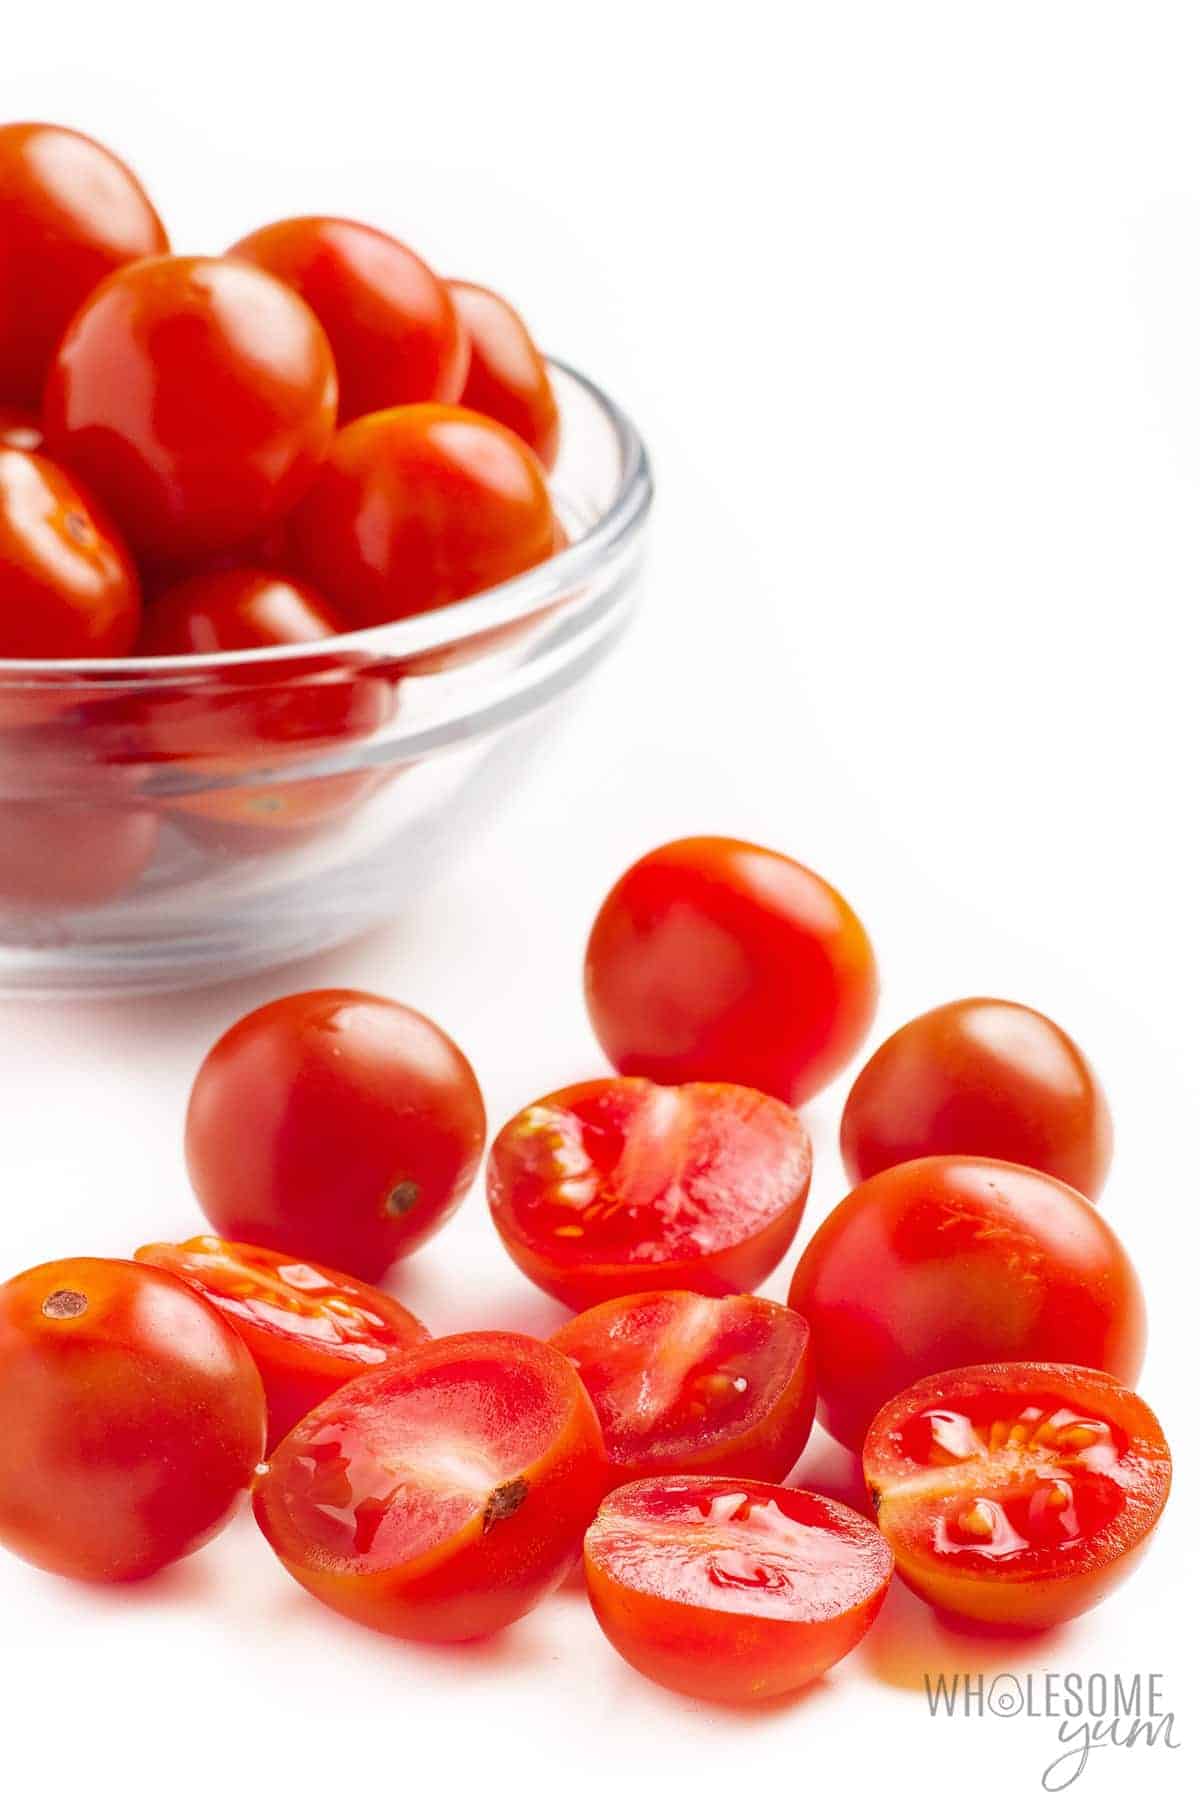 How high are carbs in cherry tomatoes? These halved, raw cherry tomatoes are low in carbs.